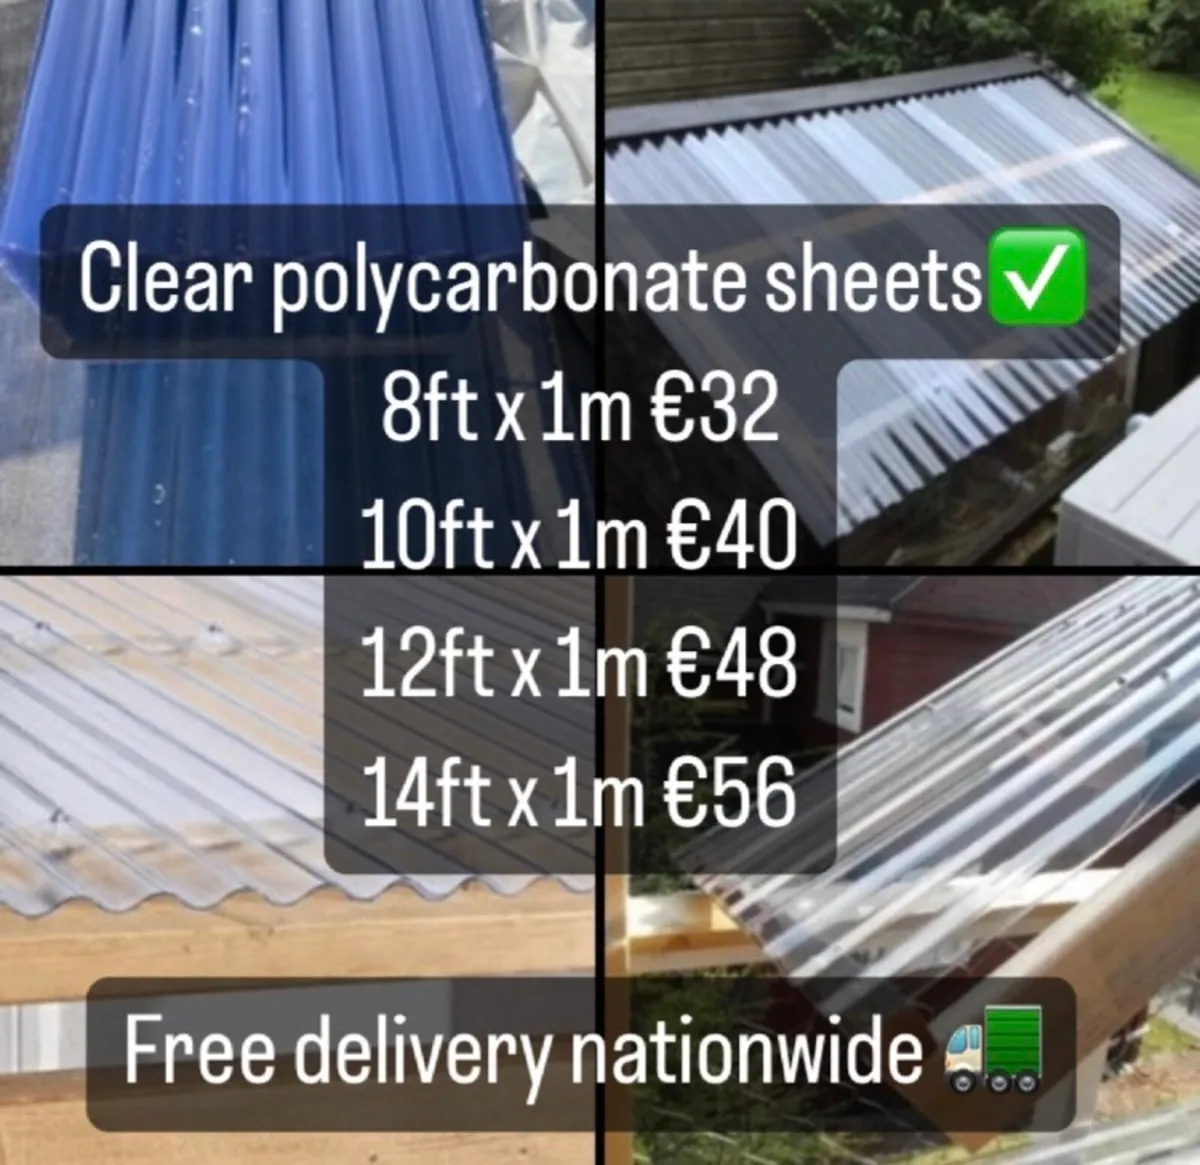 Clear polycarbonate skylights✅€4 per foot - Image 1